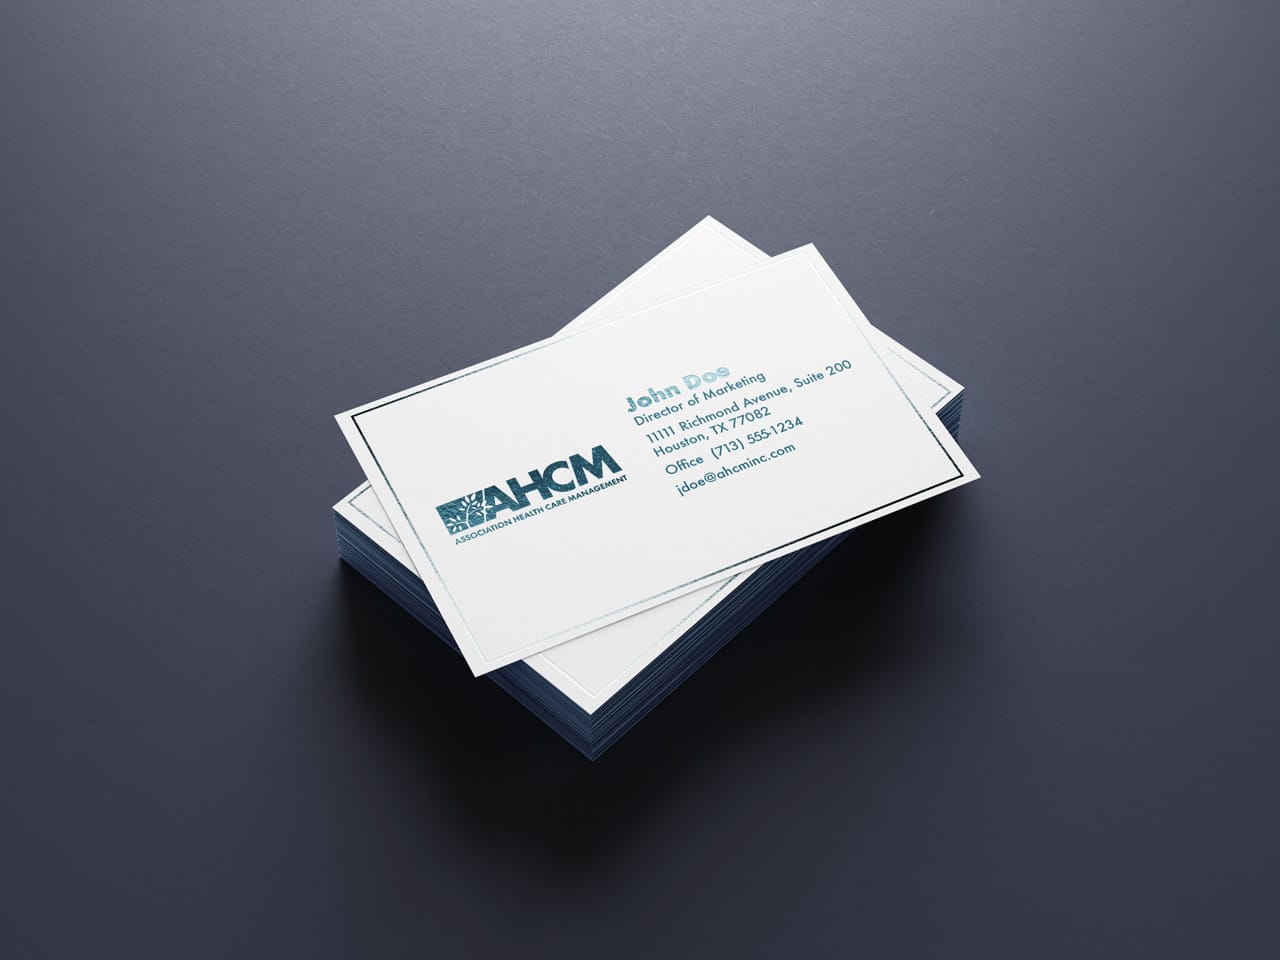 project ahcm business card 1